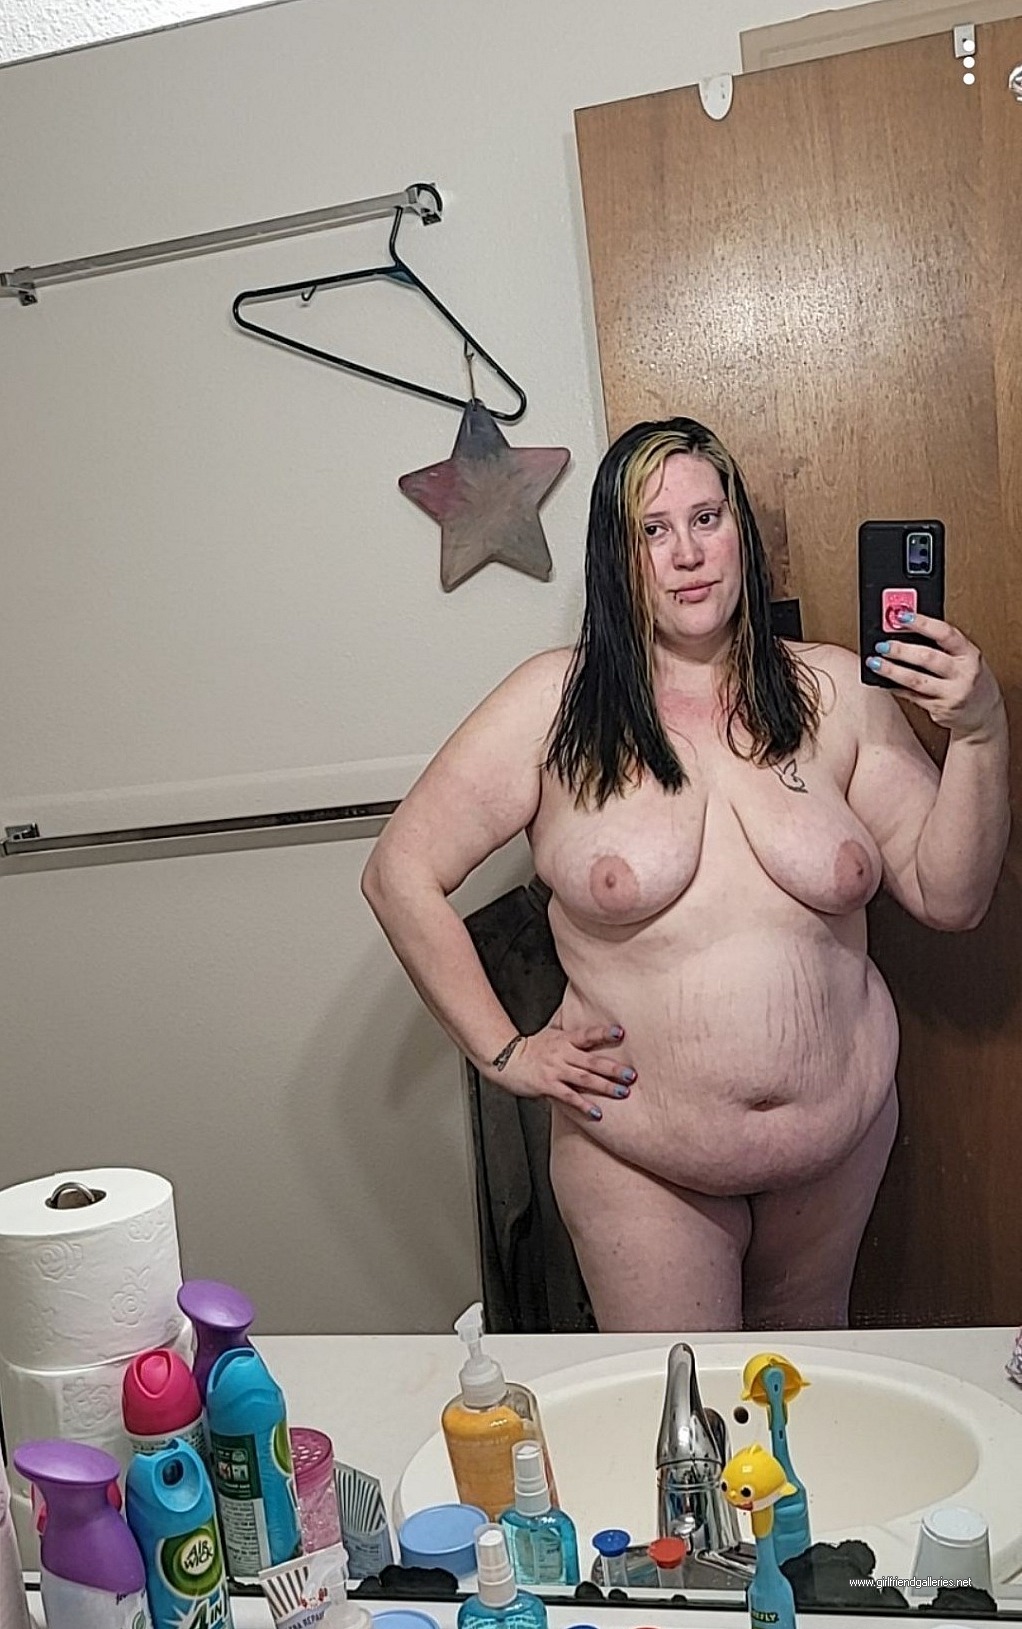 Some pics of the wife in the shower and some random pics of her